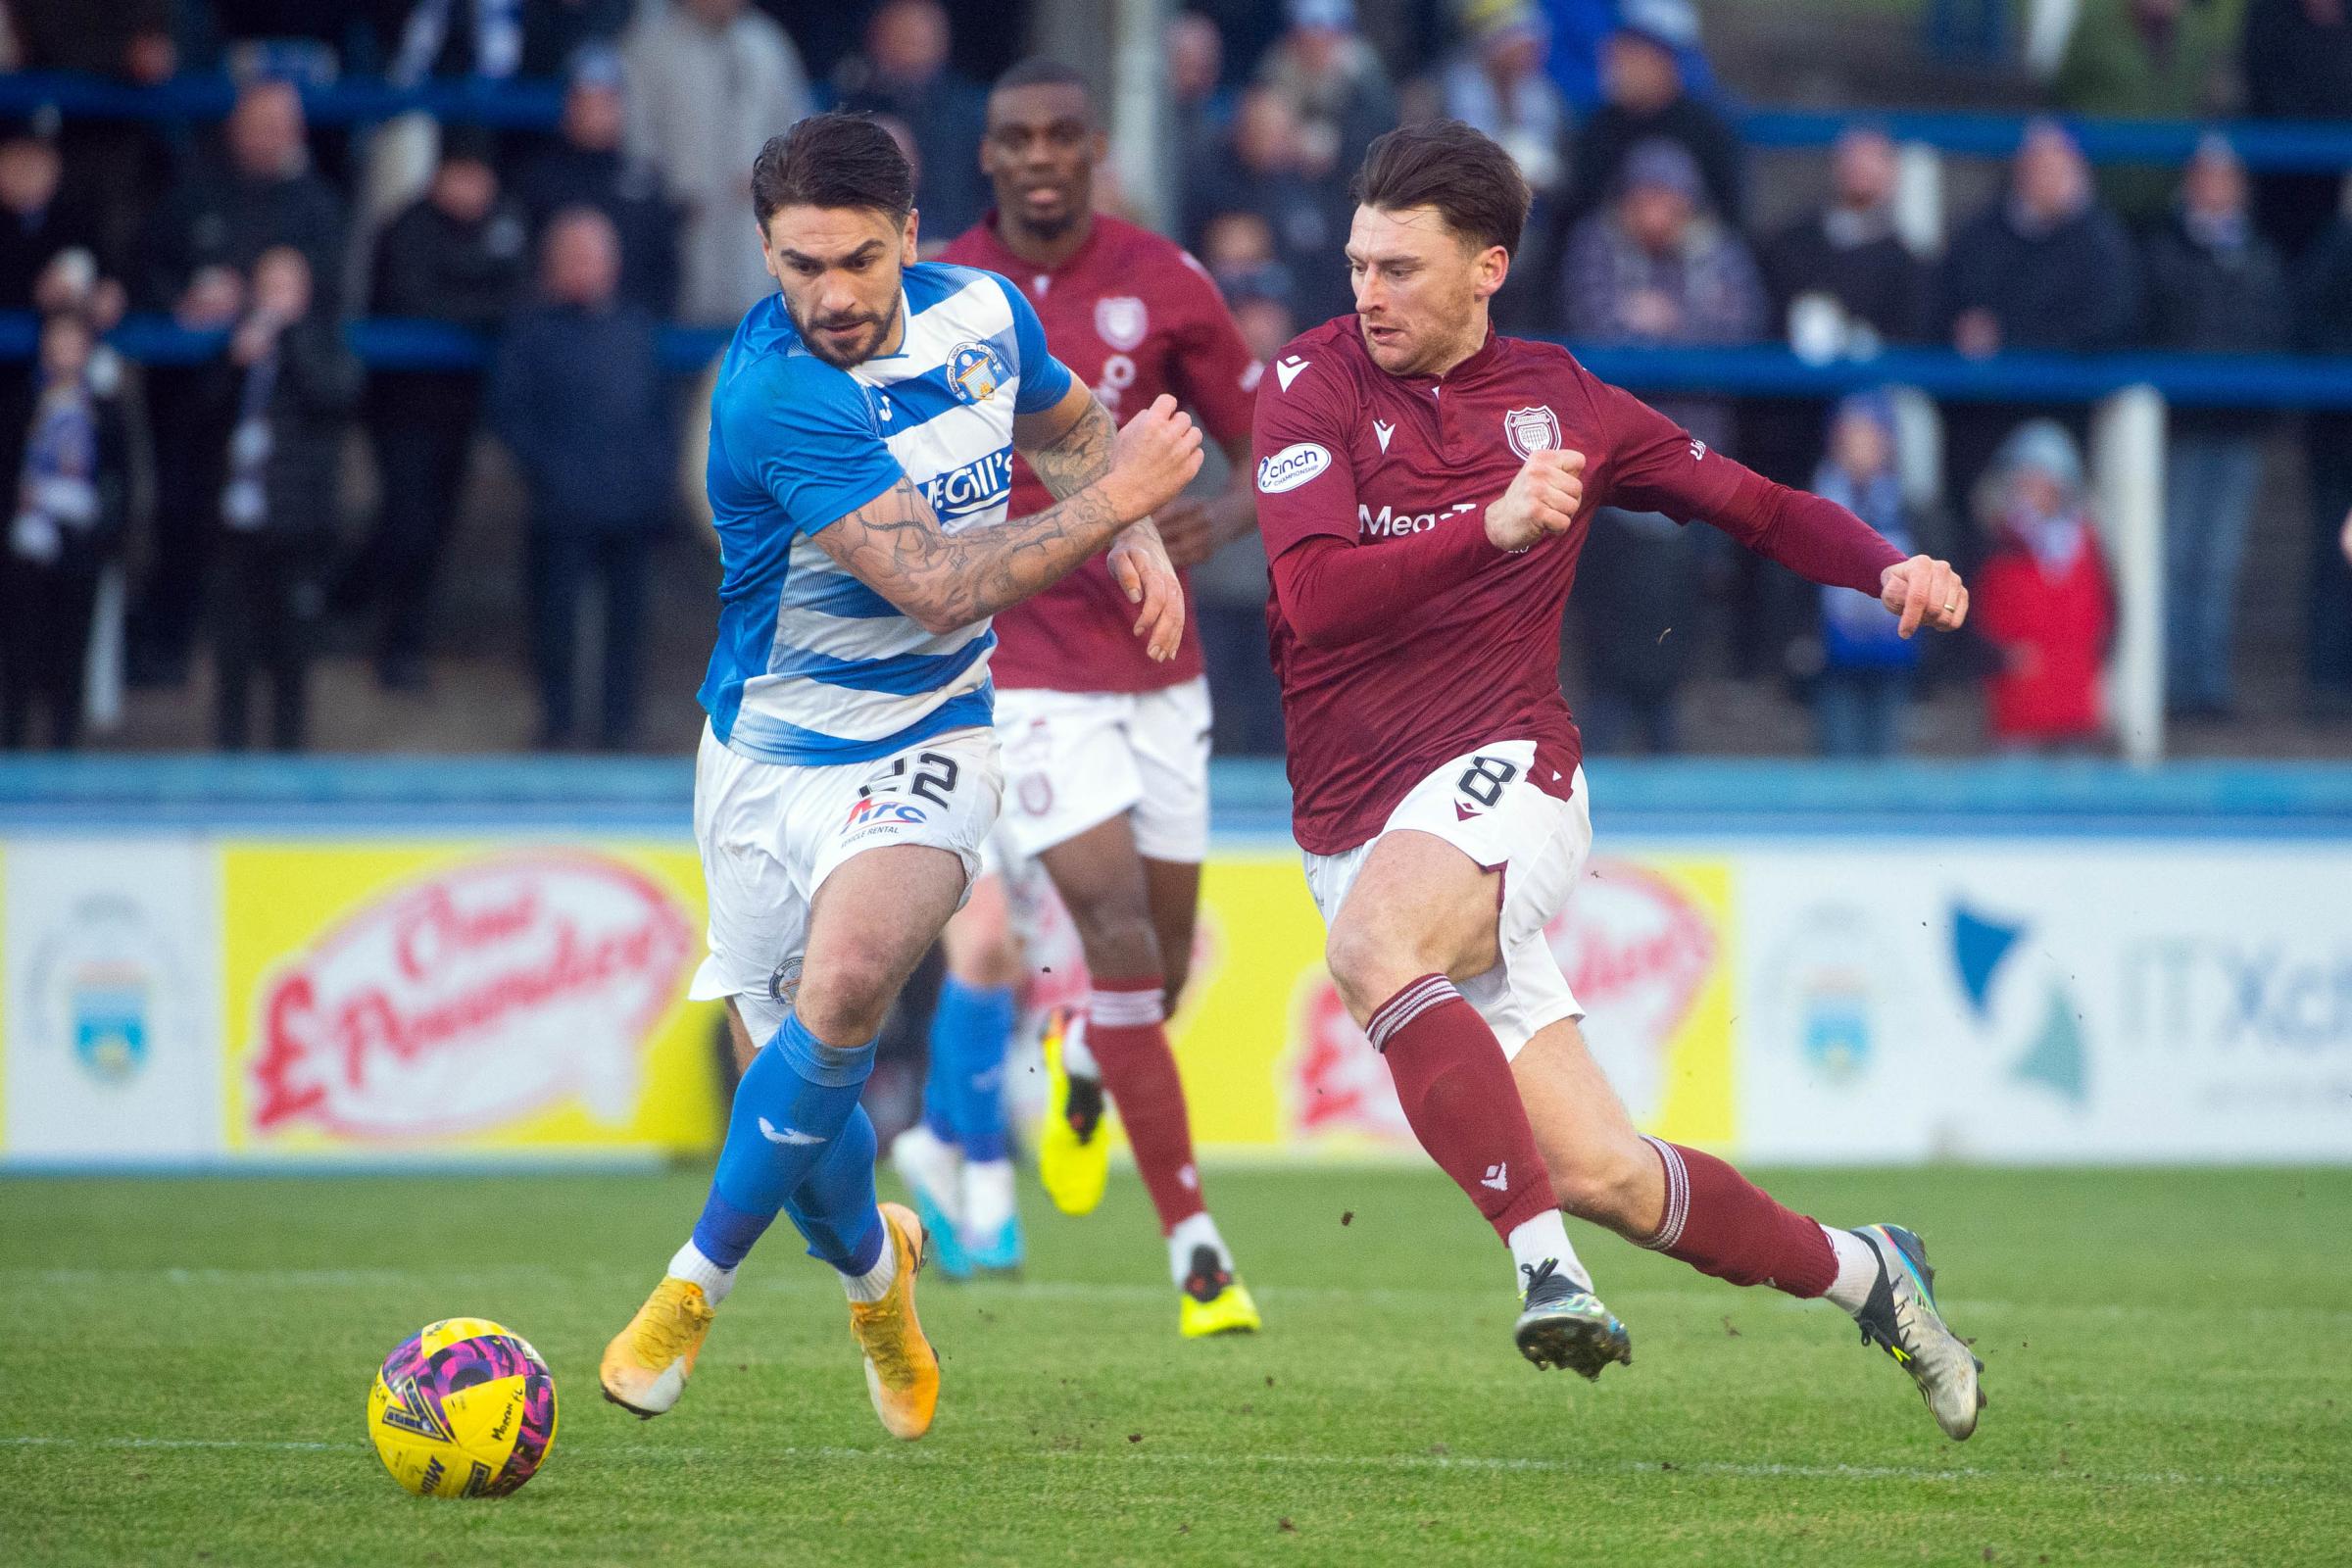 Morton face Inverness as they hope to end losing streak